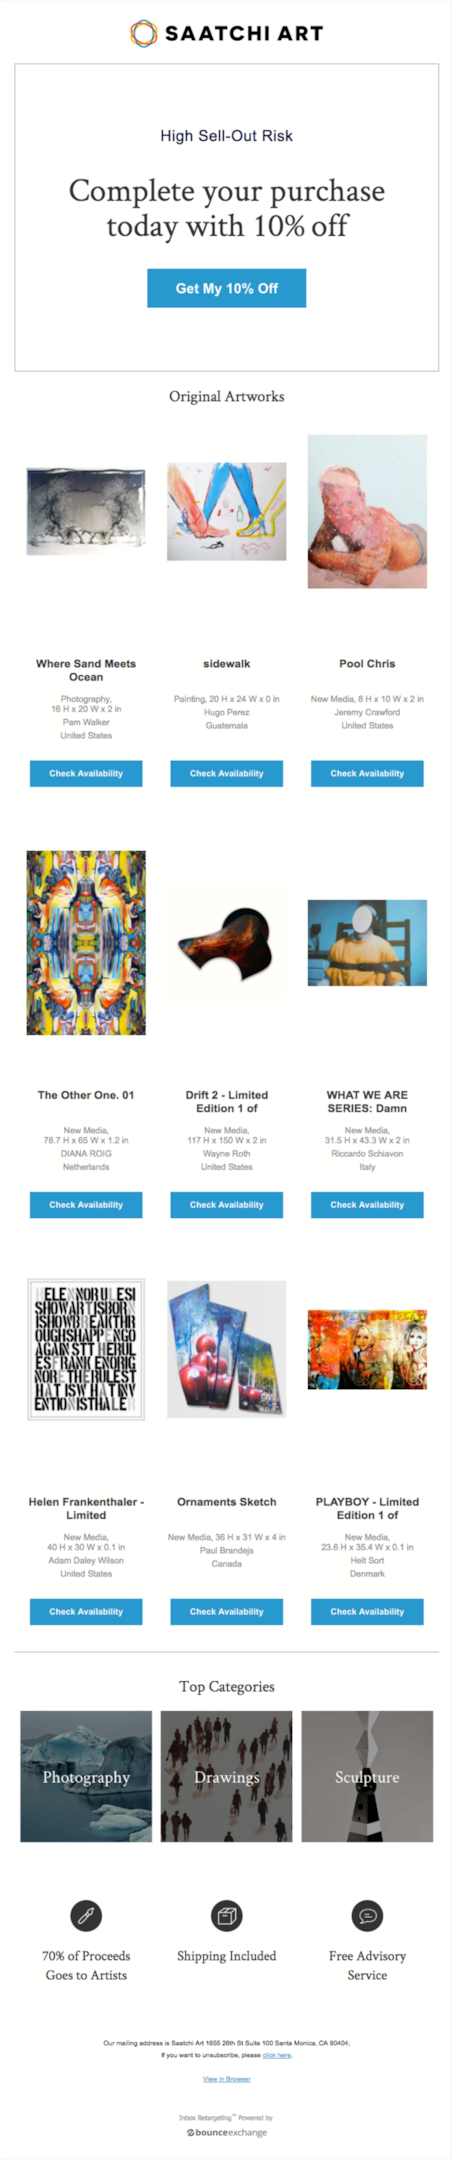 Saatchi Art Cross Sell Email